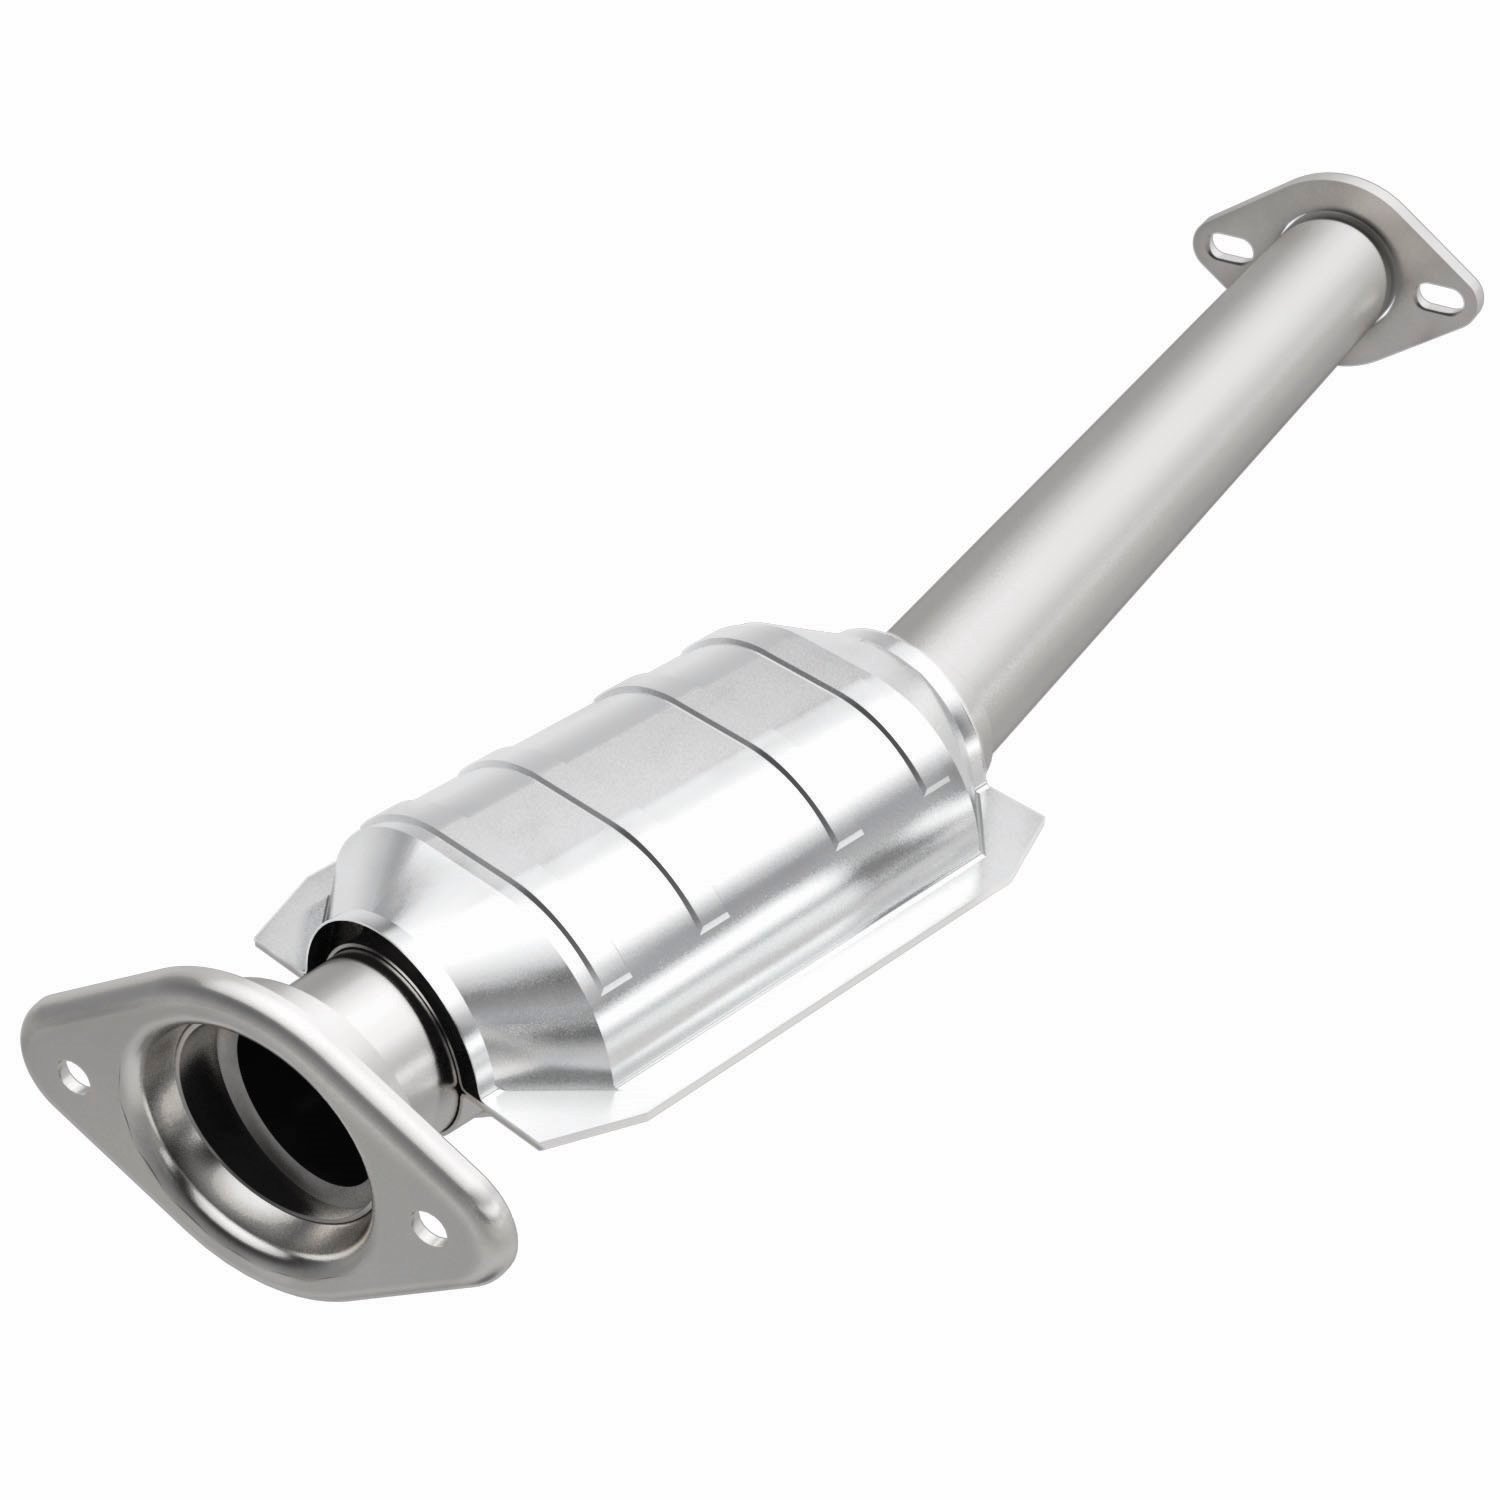 HM Grade Federal / EPA Compliant Direct-Fit Catalytic Converter 23326